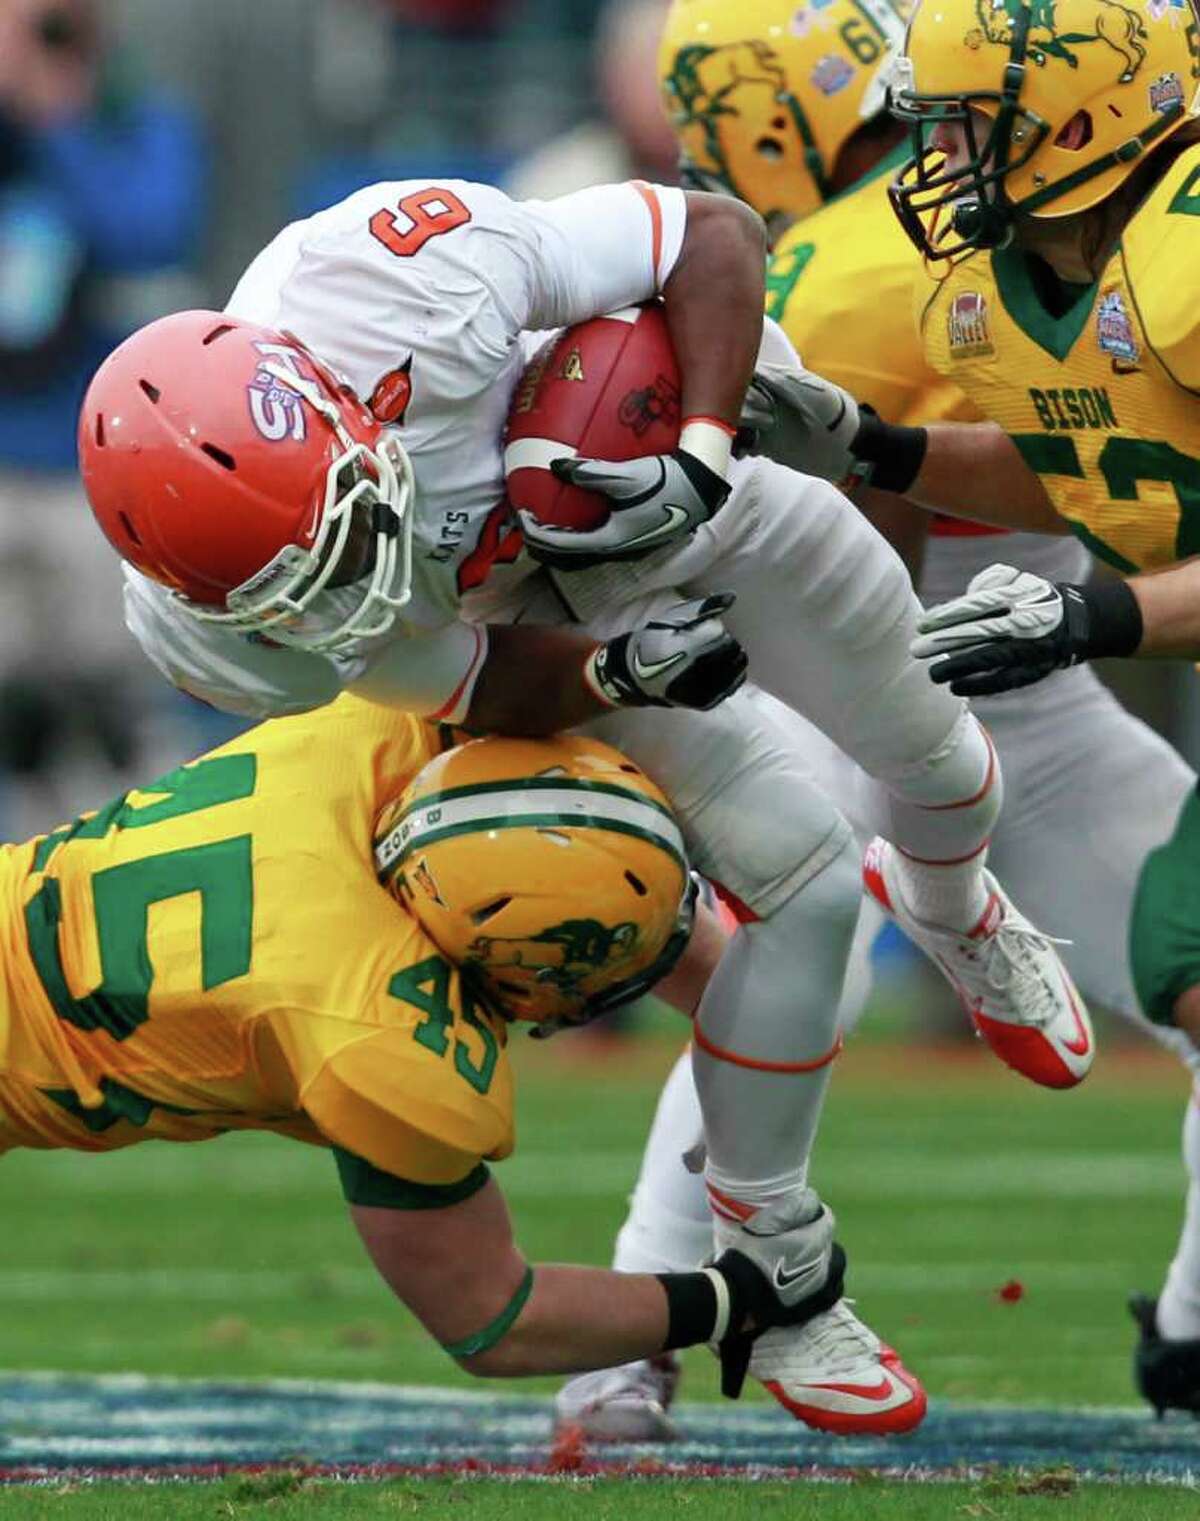 Sam Houston State University wideout Richard Sincere (6) and his teammates were held to six points by North Dakota State. The No. 1-ranked Bearkats came into the Football Championship Series title contest averaging 39 points a game. Sam Houston State ended the season with a school-record 14 wins.